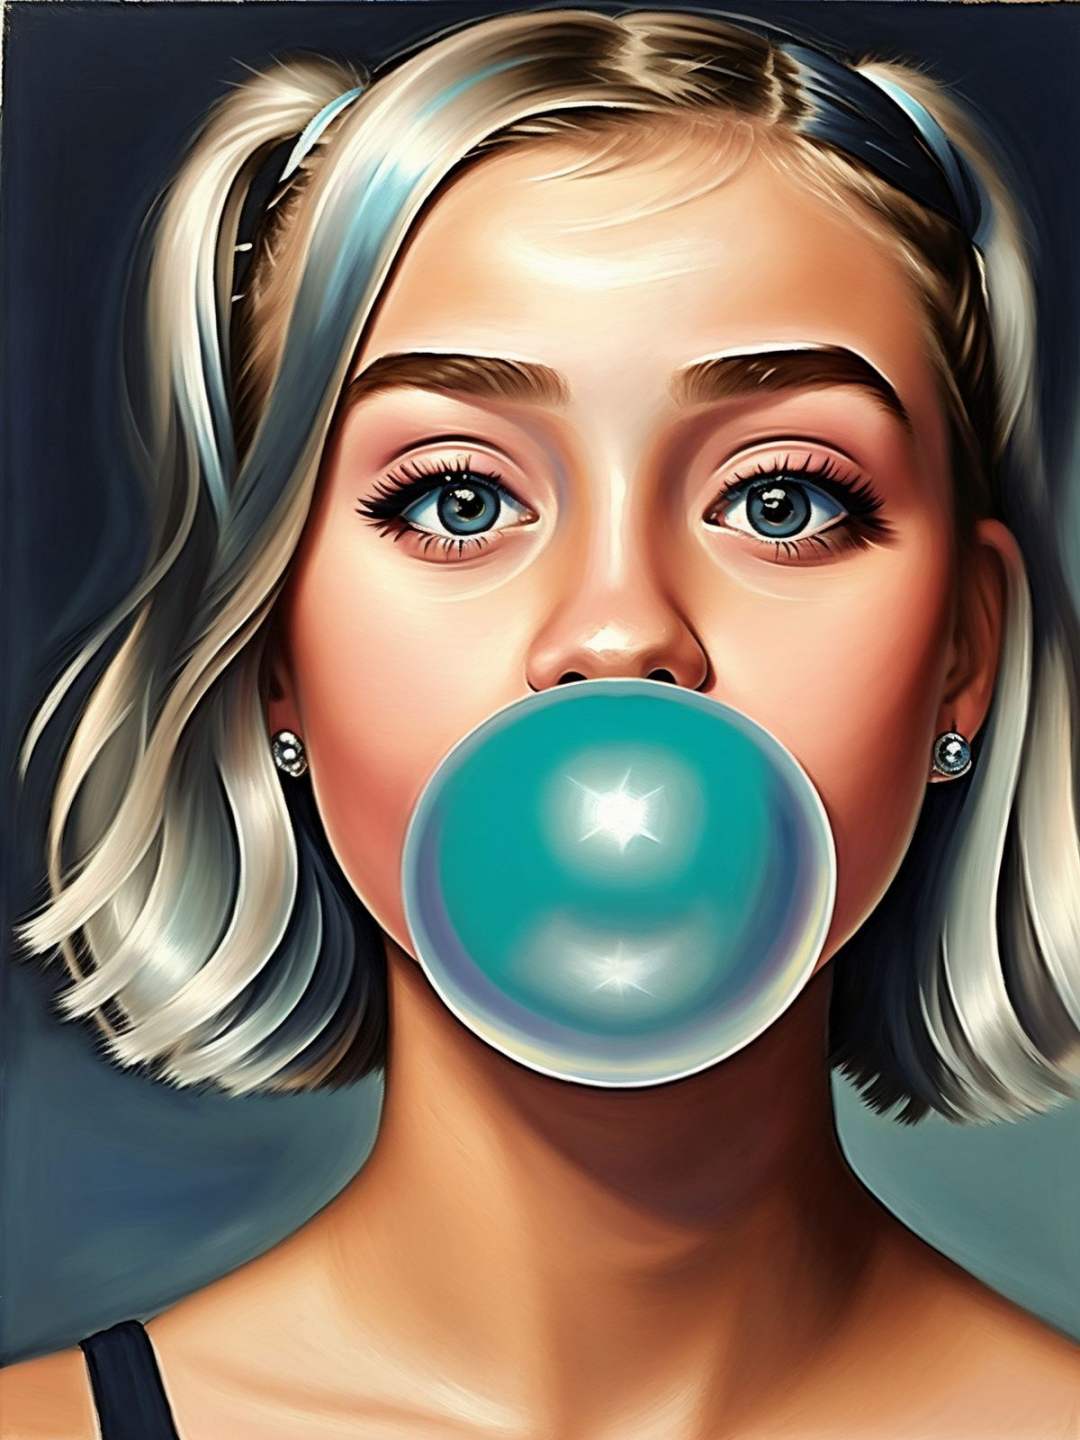 painting in the style, of a teenage girl blowing bubble gum with bare shoulders and her head turned , navy_blue tones and pale highlights. <lora:Bubble Gum_v2.0:0.6>